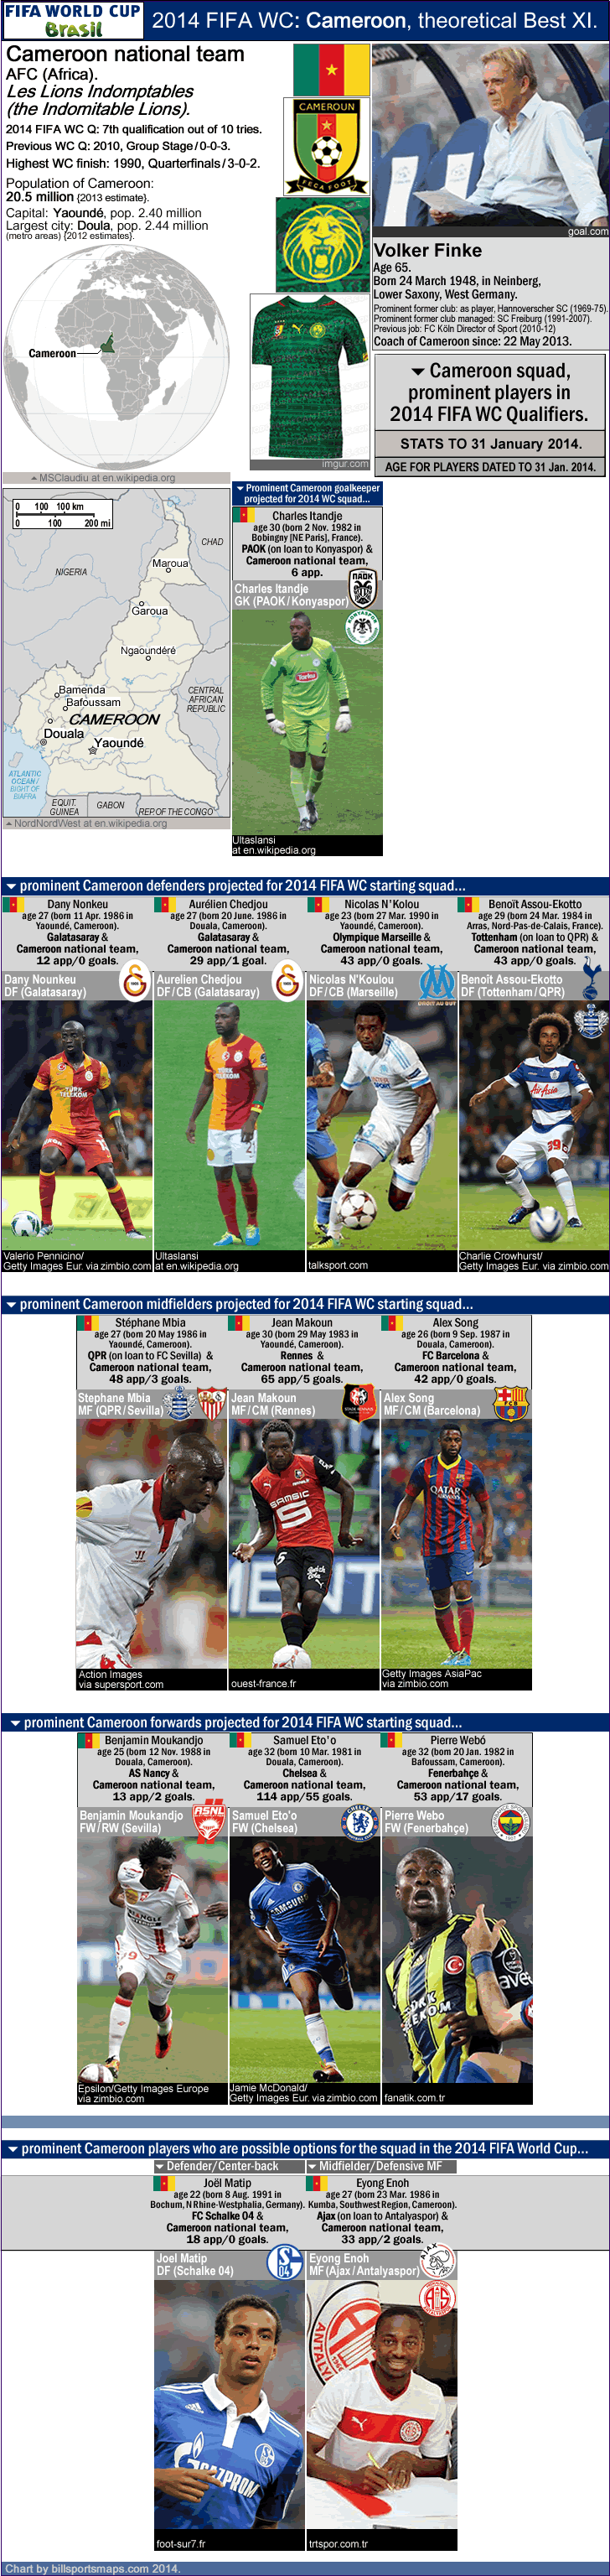 cameroon_2014-fifa-world-cup_squad_best-xi_alternate-options_f_.gif